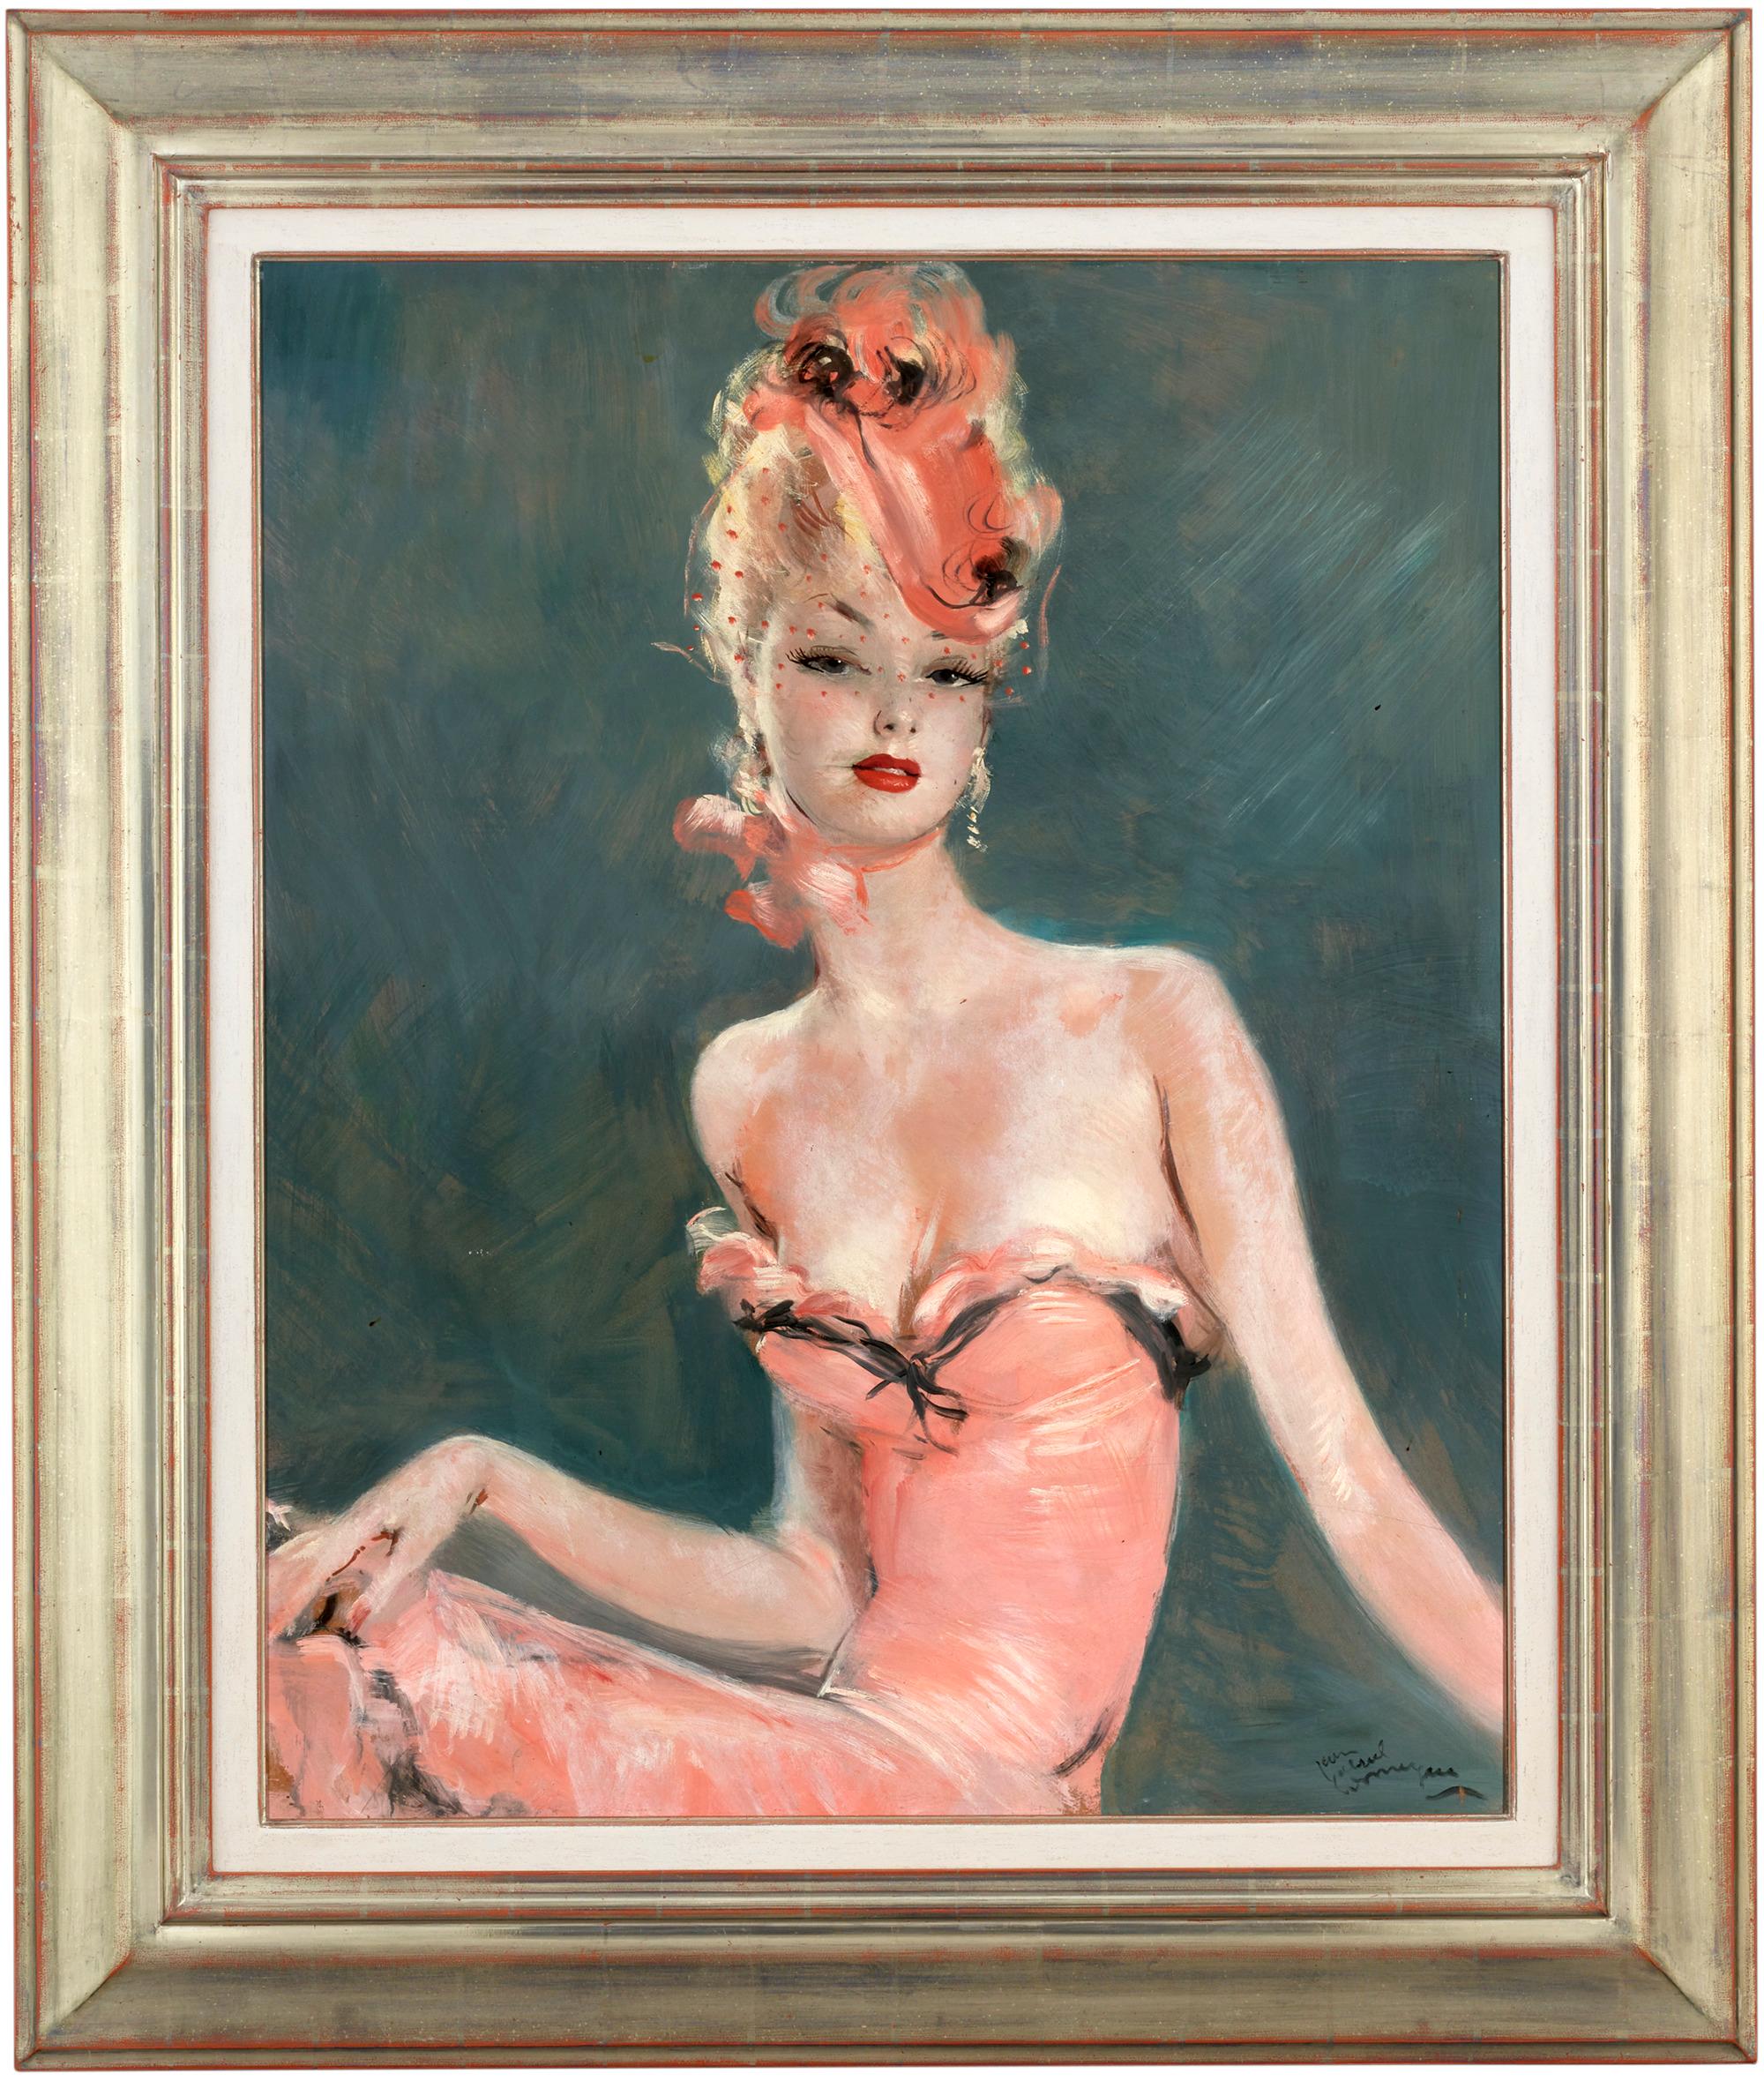 Ariane - Painting by Jean-Gabriel Domergue